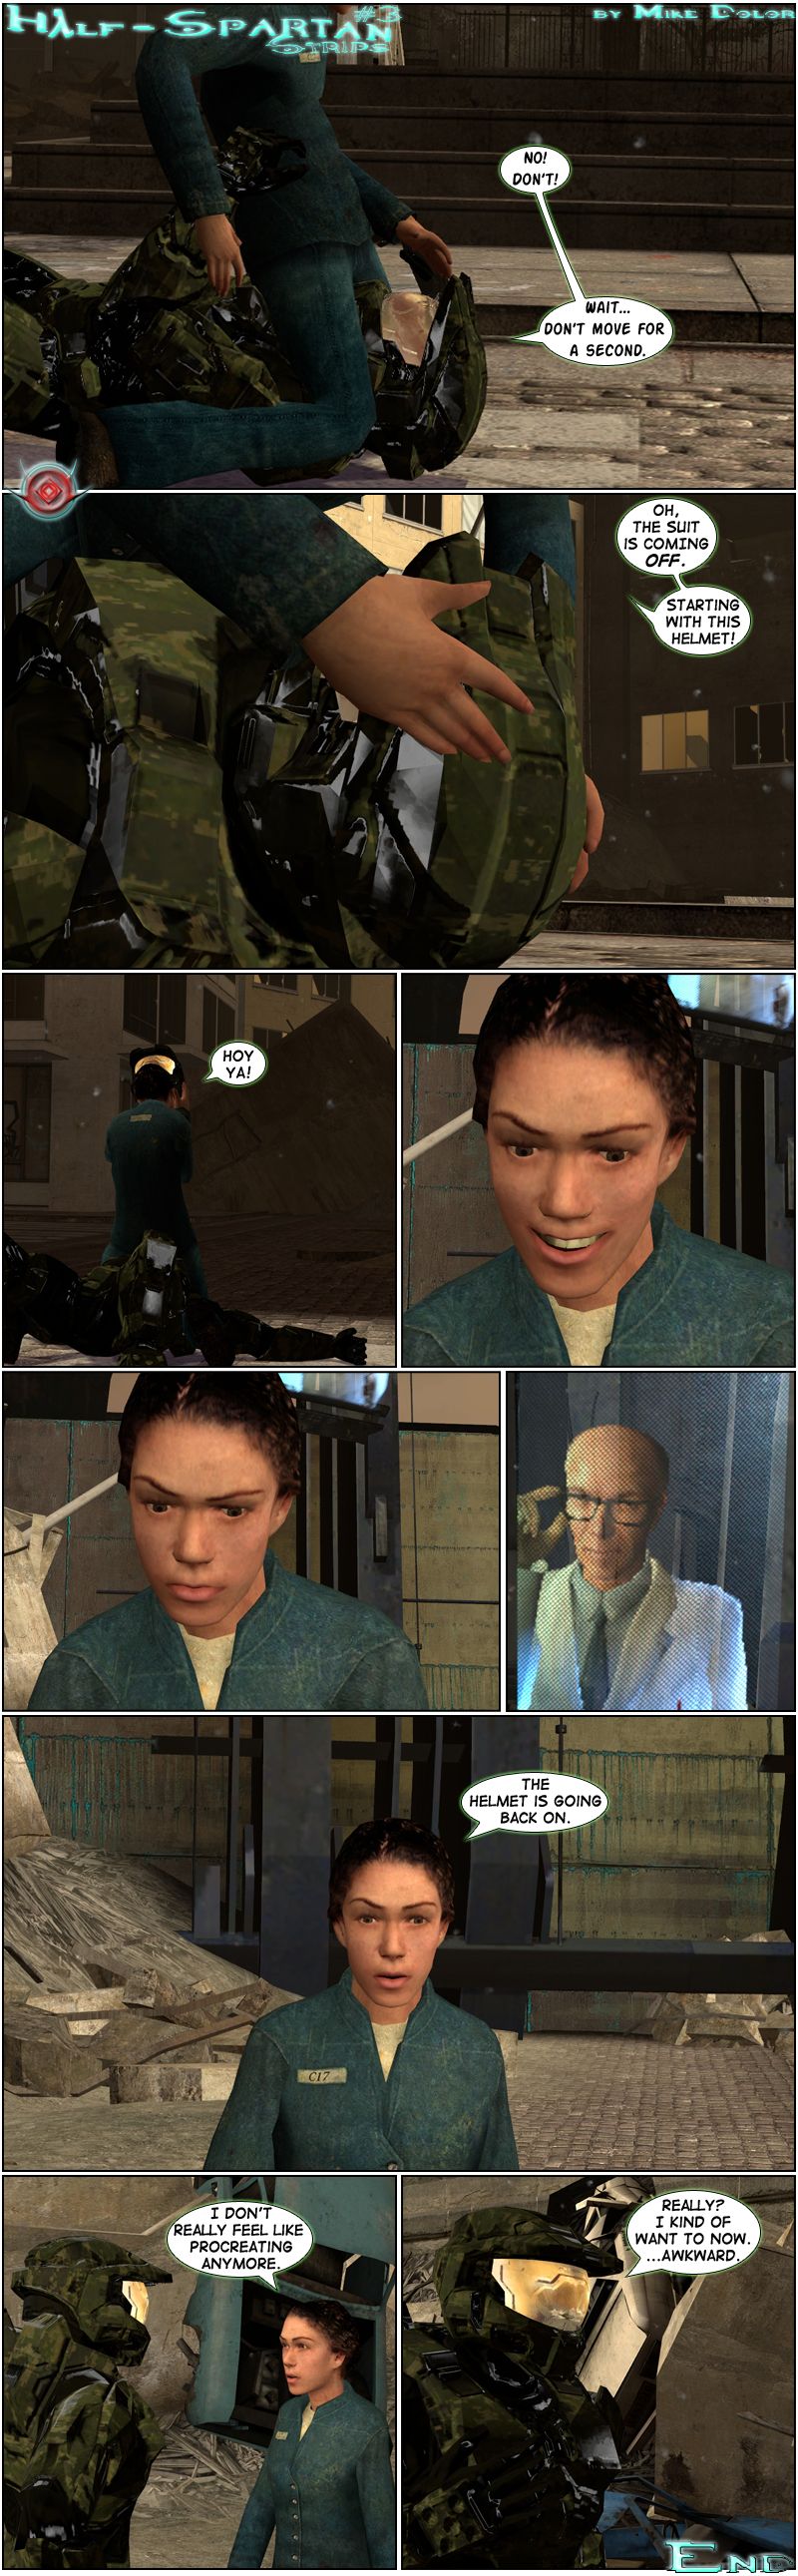 Master Chief is on the ground, with Amy kneeling over his helmet. He tells her not to, then says wait and tells her not to move for a second. Amy declares that the suit is coming off starting with the helmet and grabs it. She removes the helmet and her smile turns into a frown. On the broadcast screen, Kleiner adjusts his glasses. Amy gets up and says that the helmet is going back on. Master Chief gets up and puts it back on, then Amy tells him she doesn't really feel like procreating anymore. Master Chief asks really and comments that he kind of wants to now, then says awkward. The end.